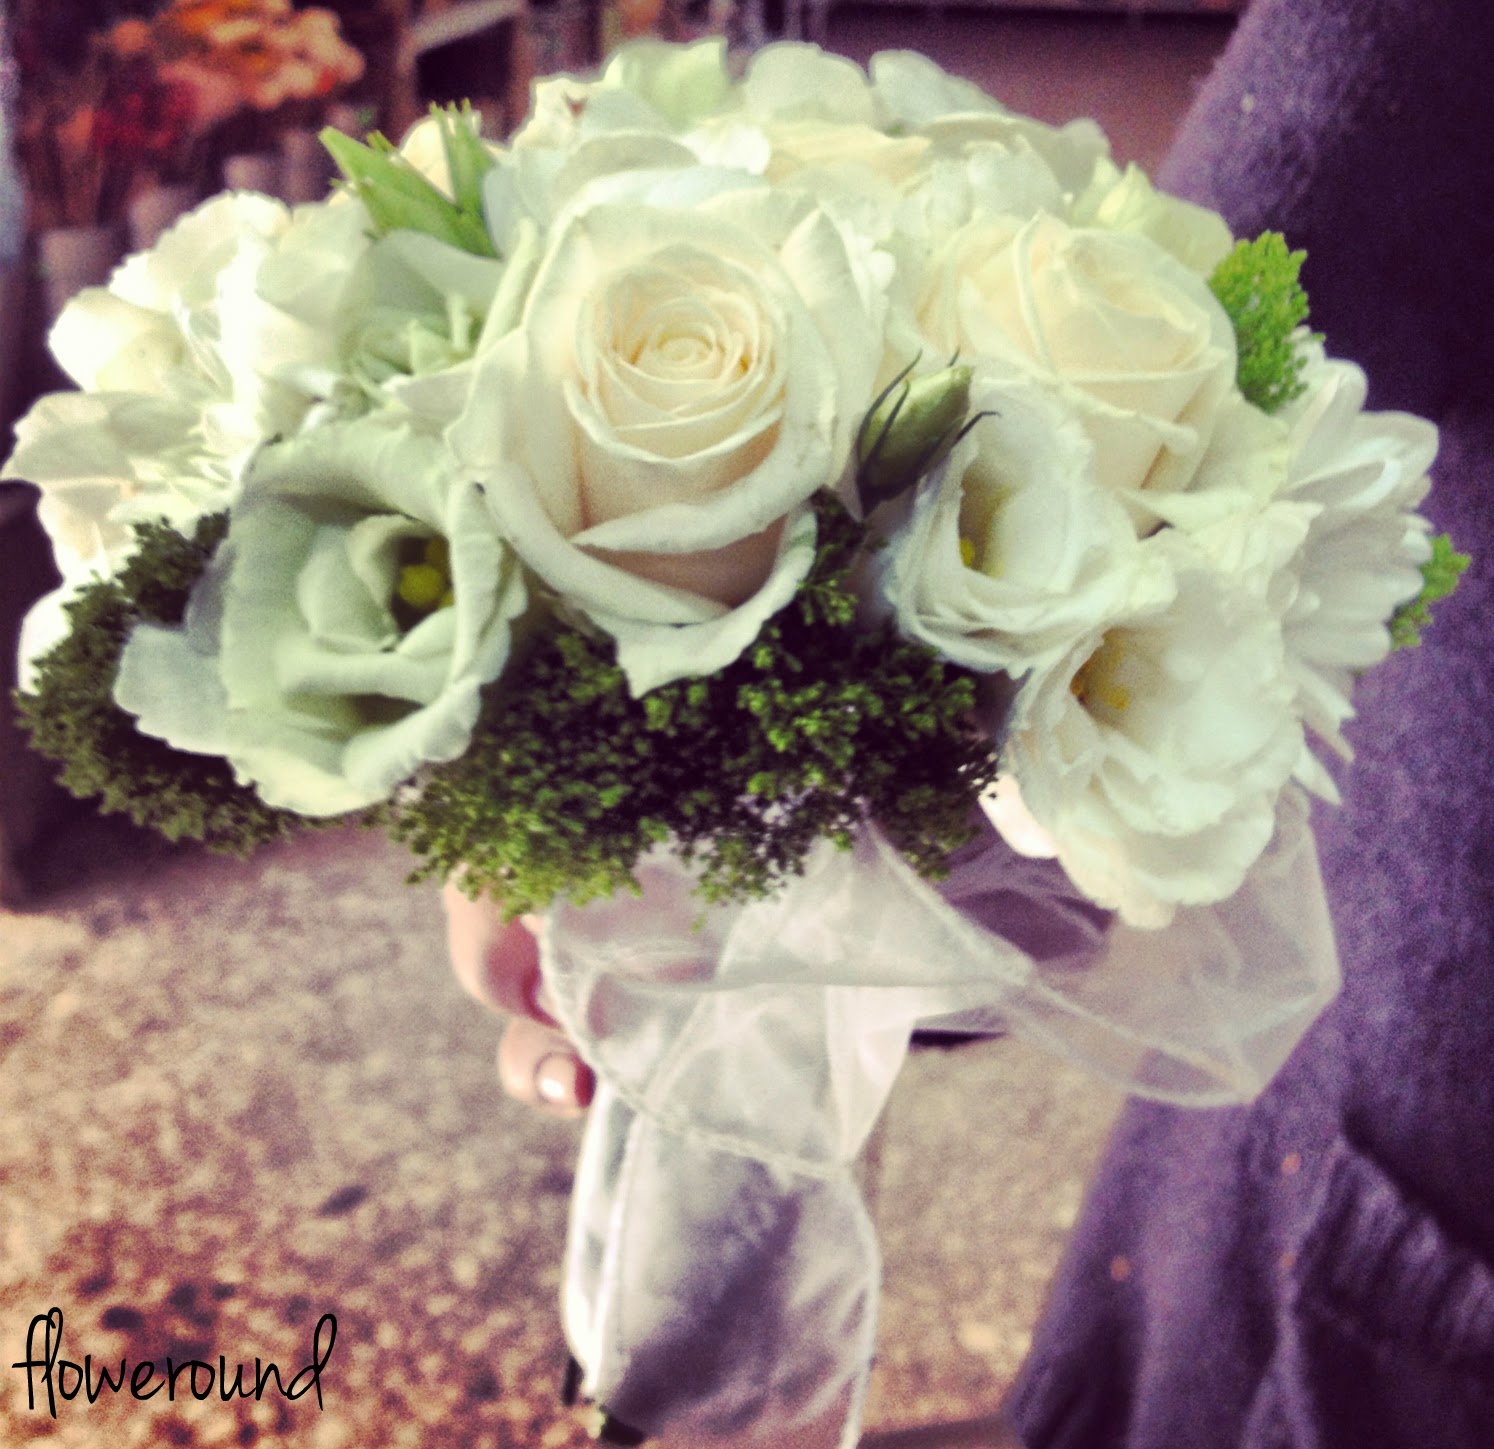 FLOWEROUND - certainly, for you.: All About Wedding Bouquets - GREAT Ideas